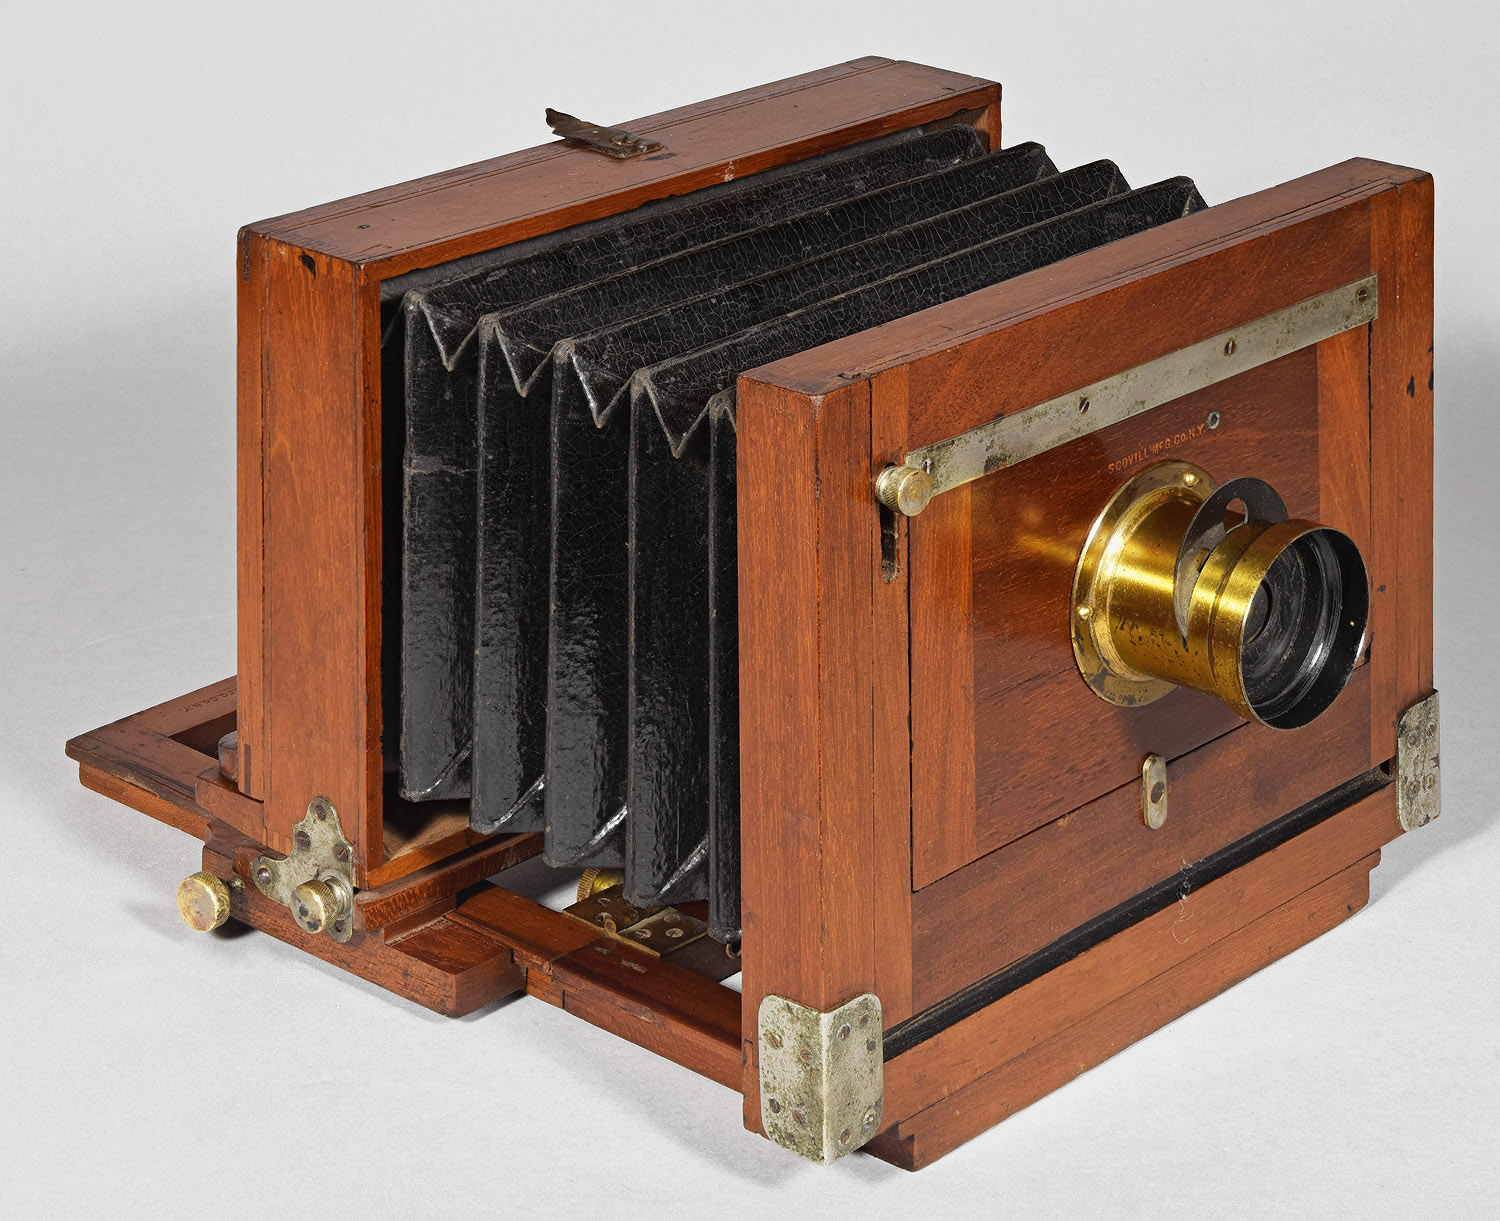 1235.Scovill.Mfg.Co.-Favorite.Var.2.or.Unknown-5x8-a-camera.only-1500.jpg